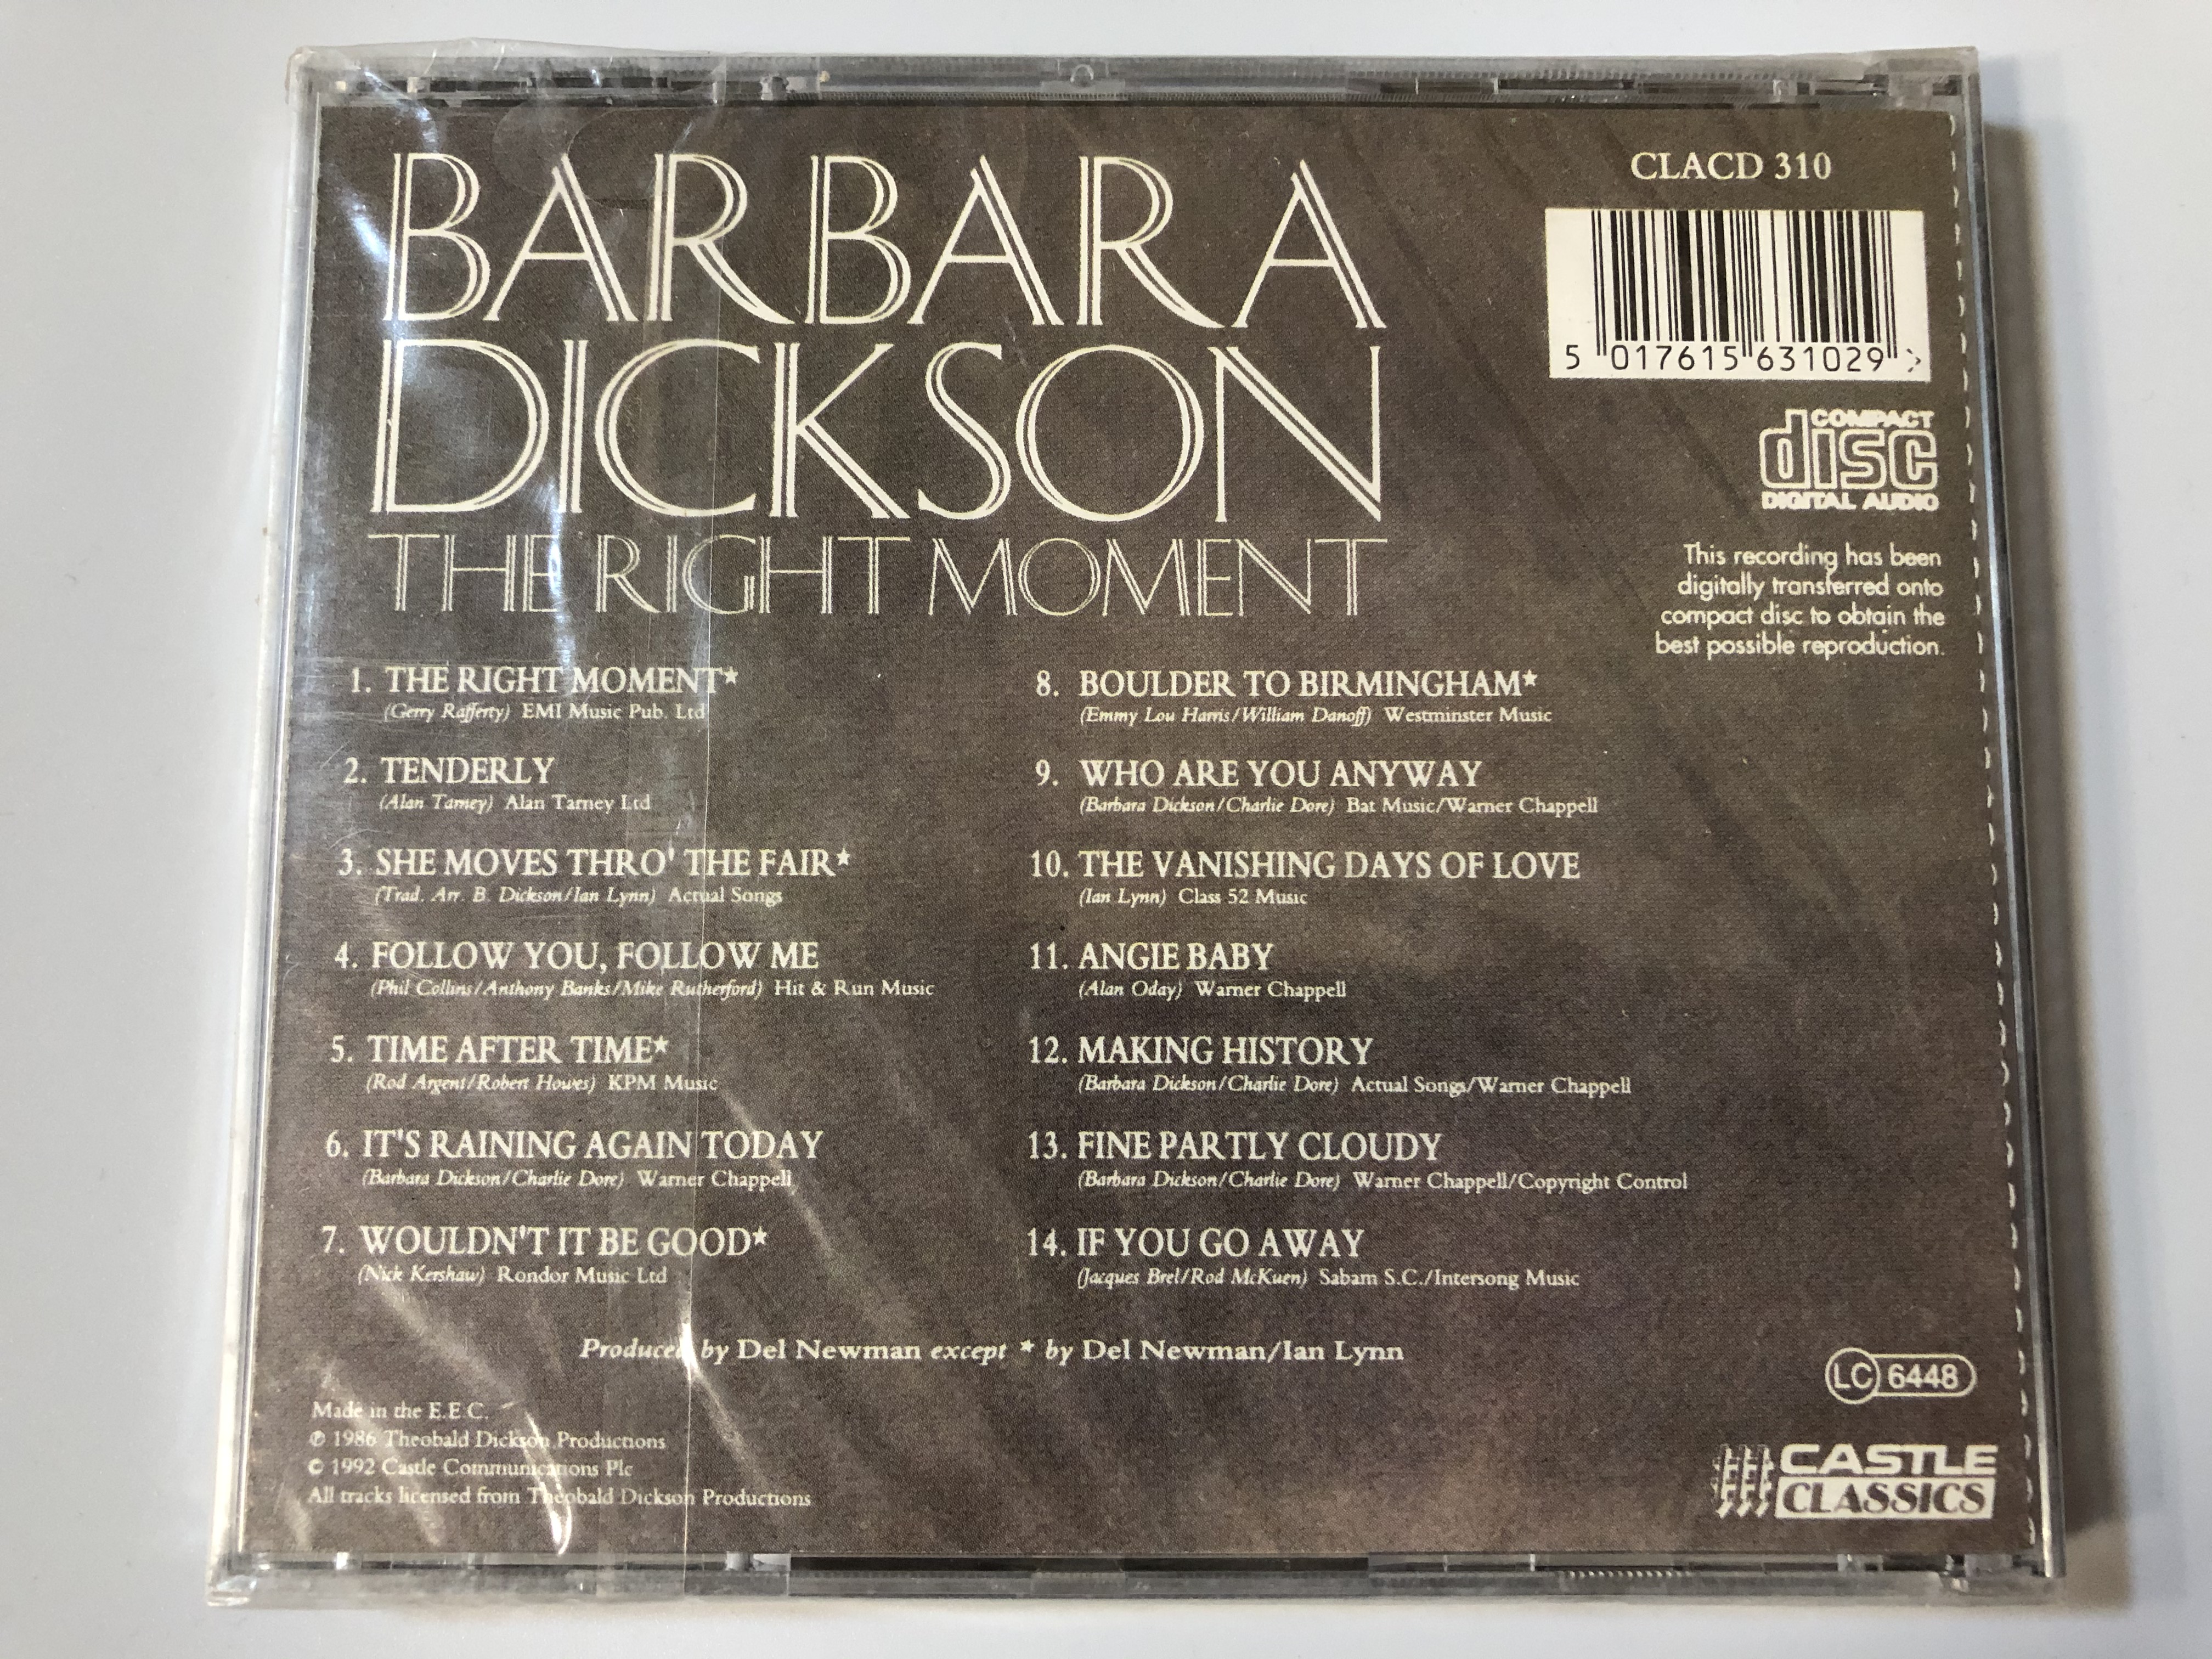 barbara-dickson-the-right-moment-castle-communications-audio-cd-1992-clacd-310-2-.jpg